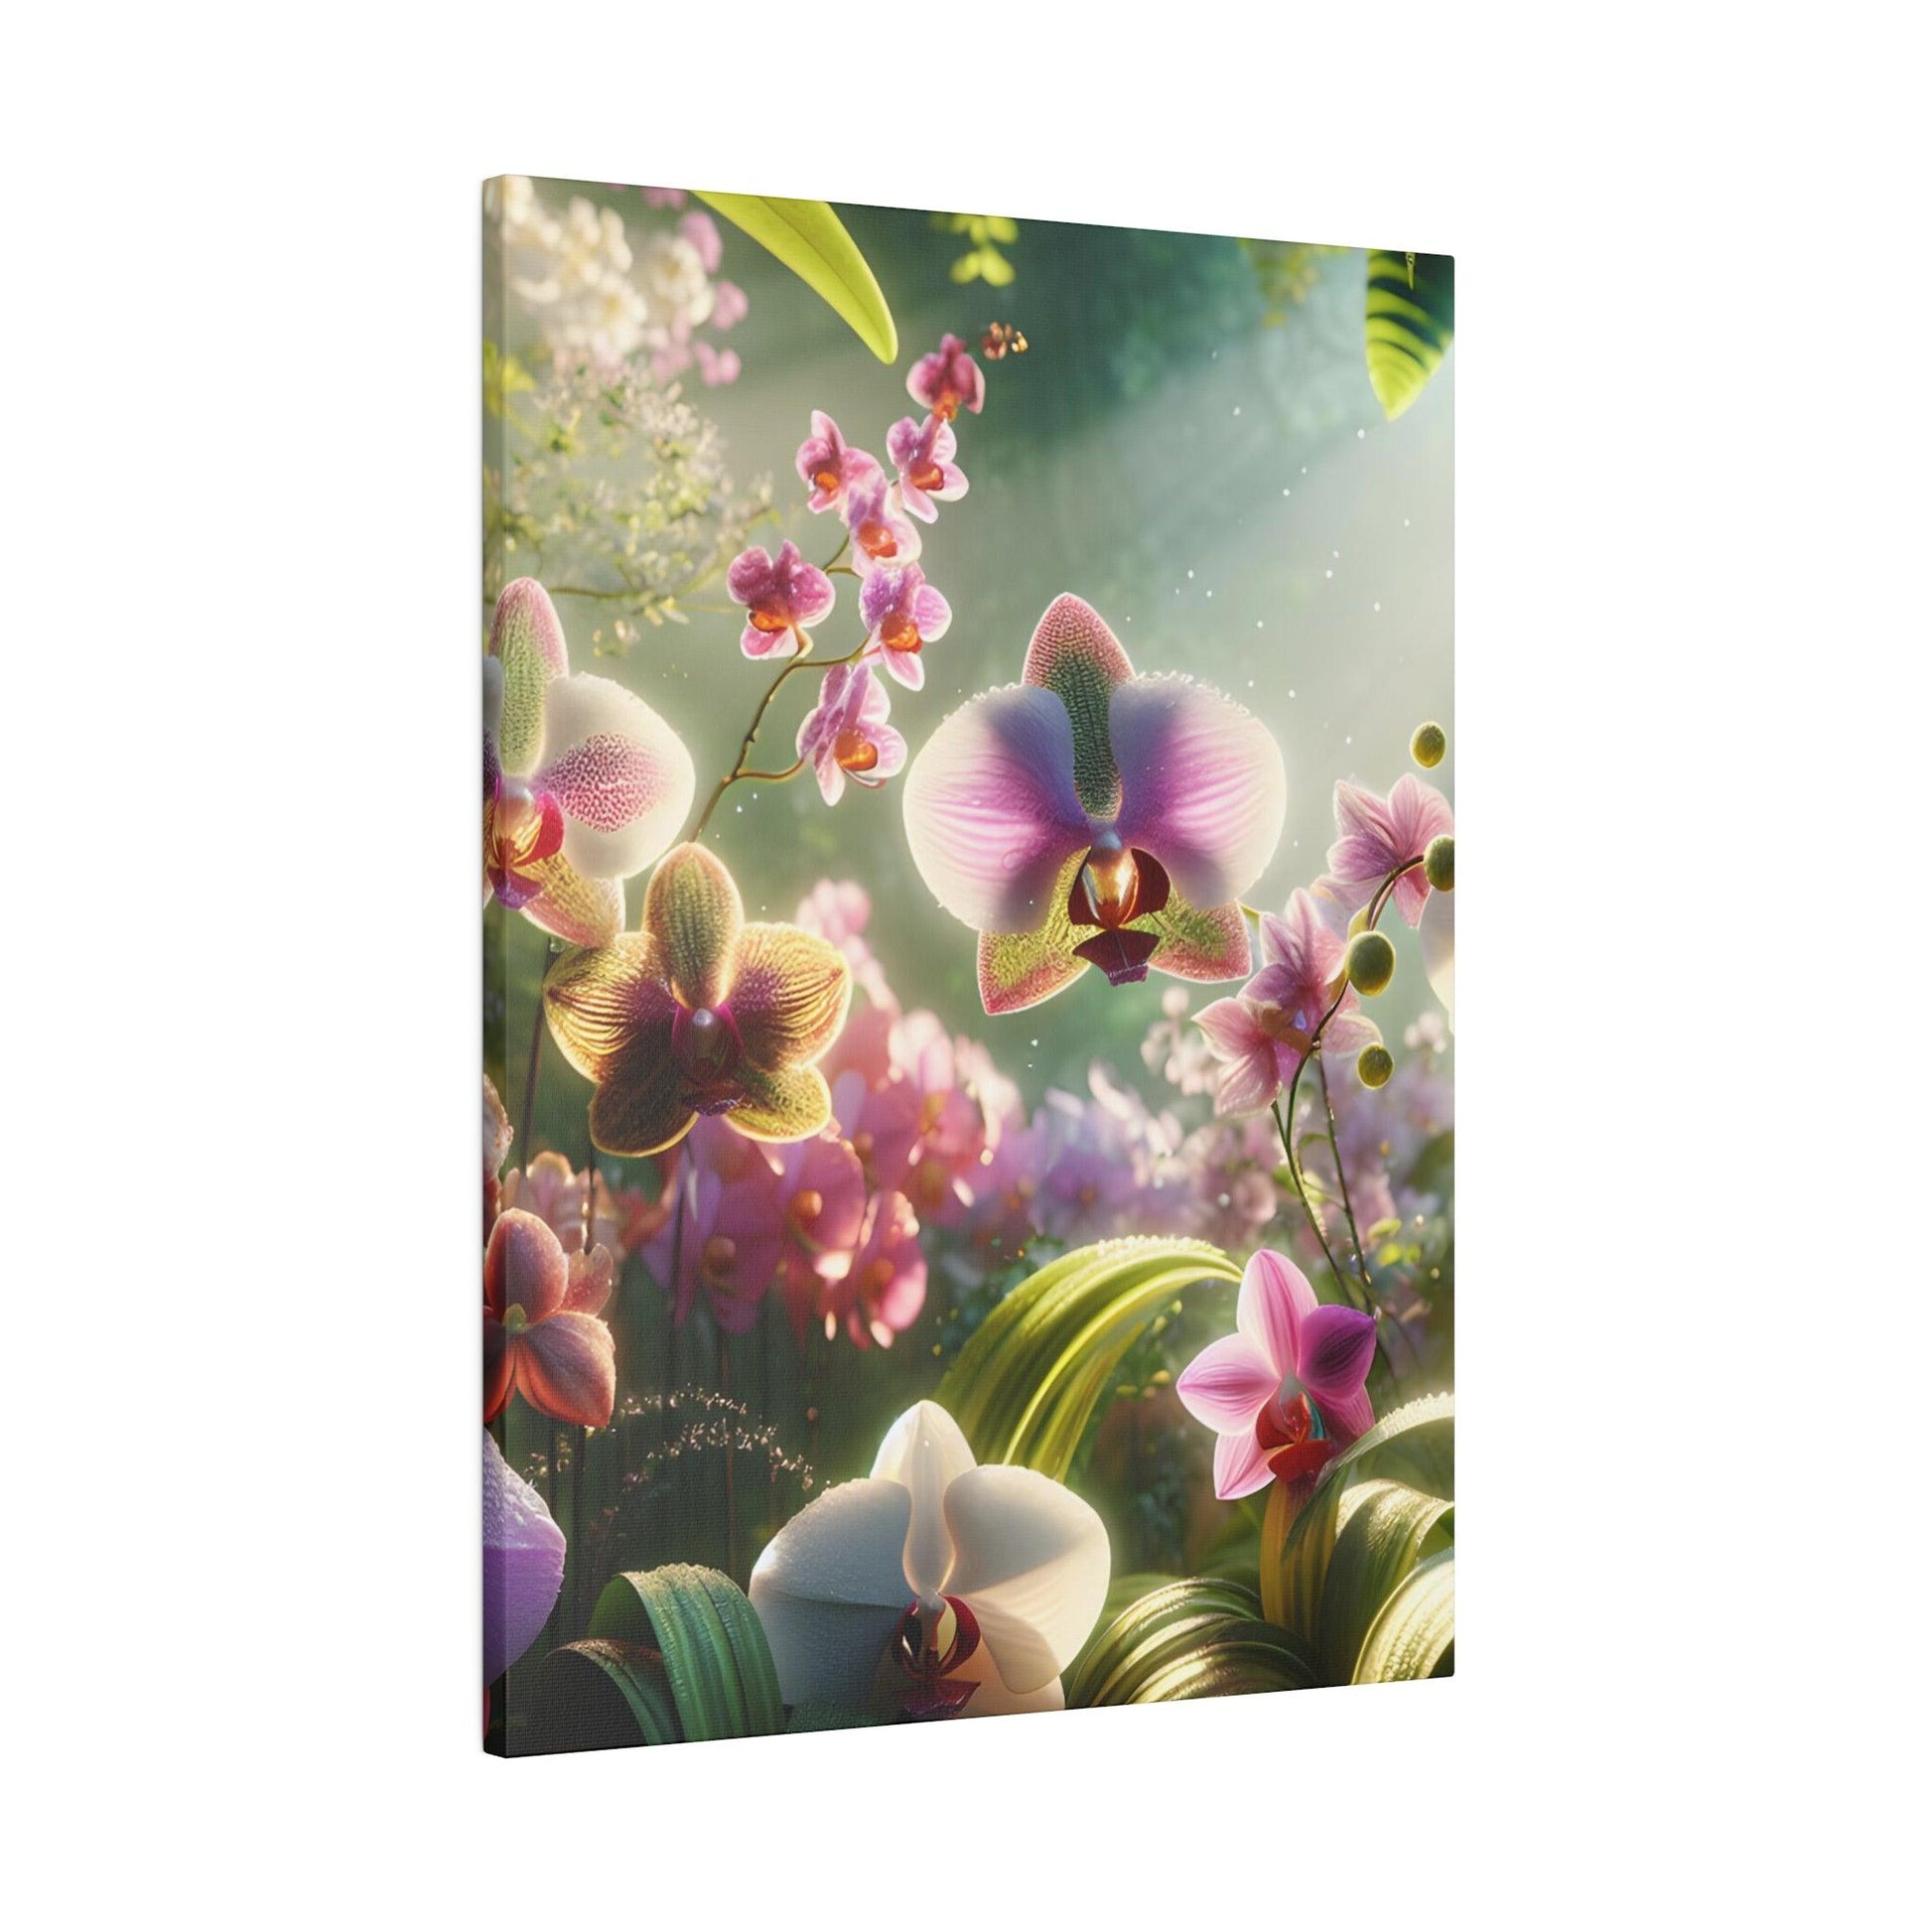 "Orchid Euphoria: Embracing Serenity with Canvas Wall Art" - The Alice Gallery